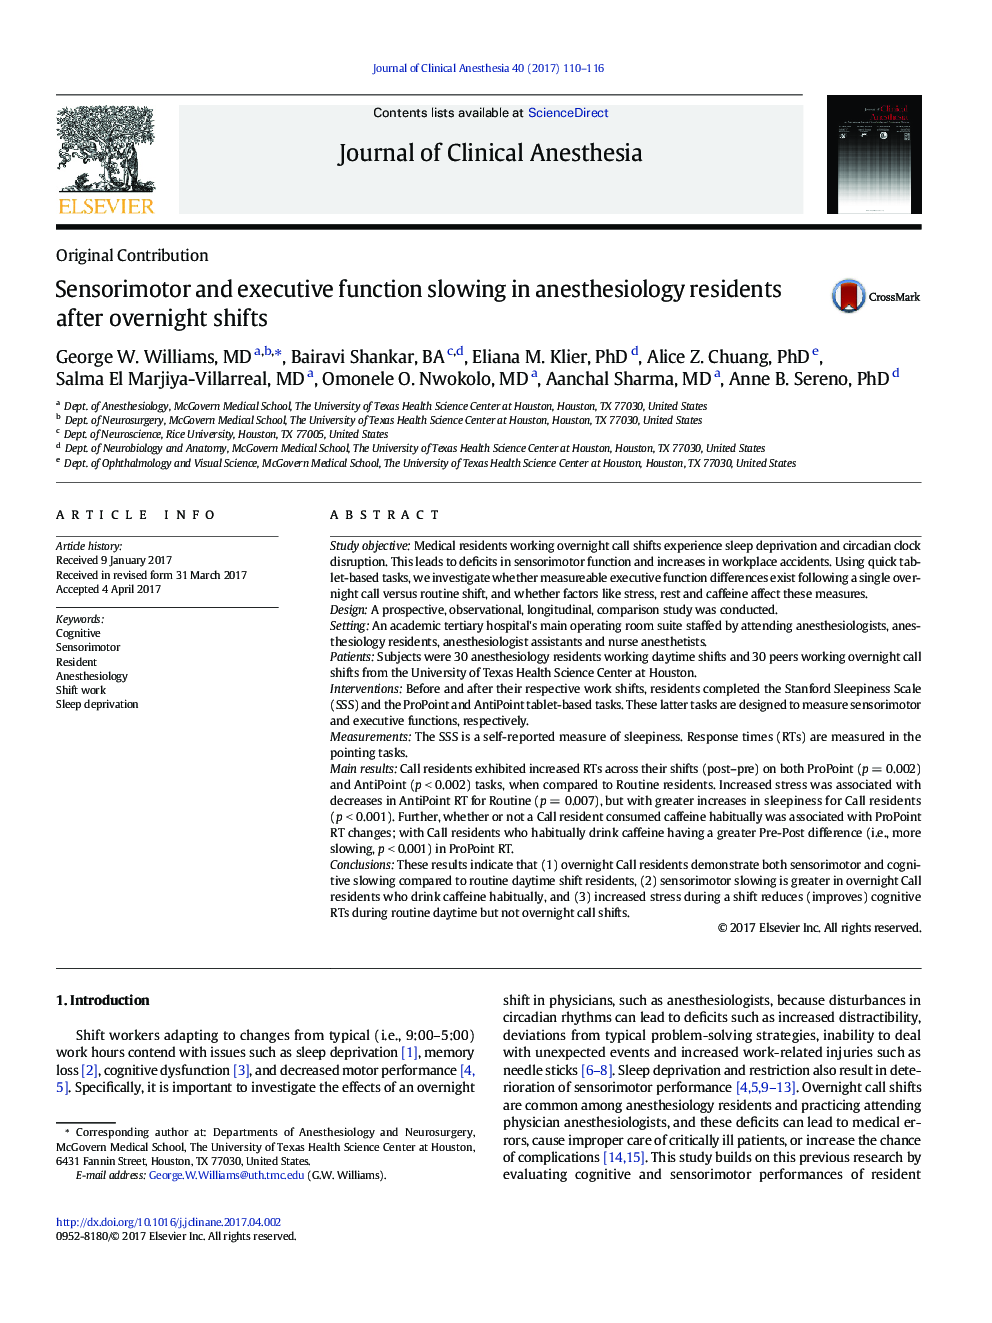 Sensorimotor and executive function slowing in anesthesiology residents after overnight shifts